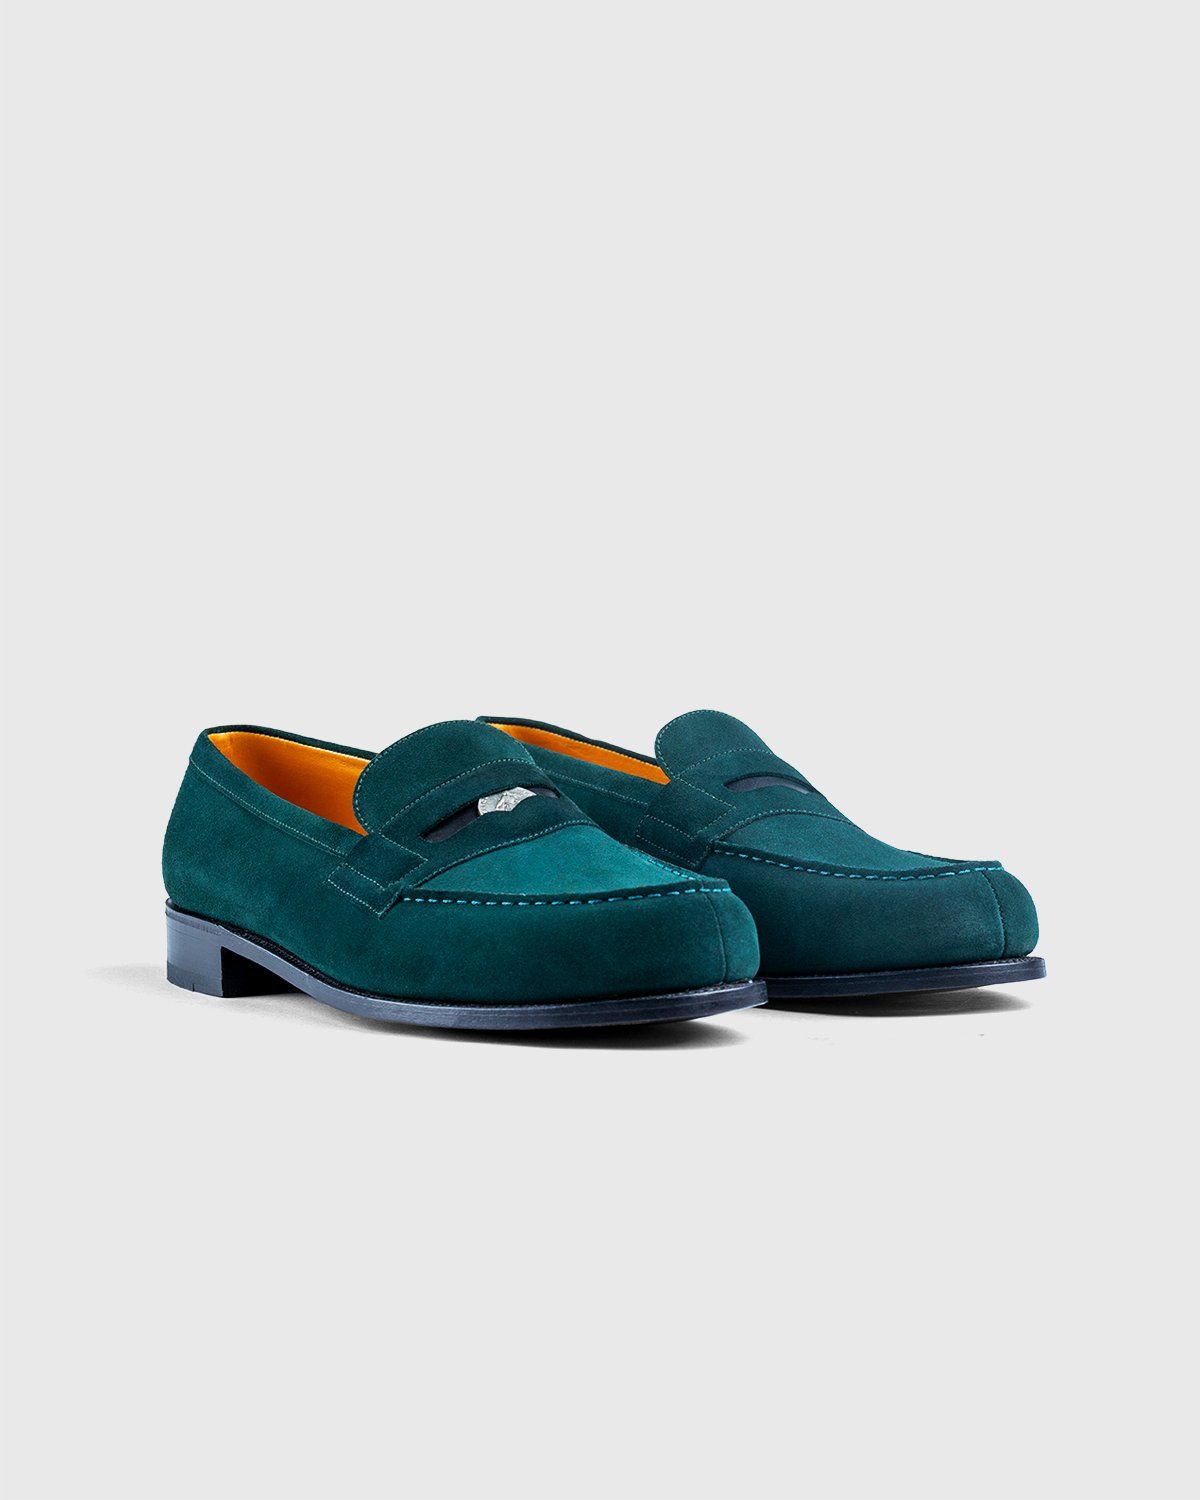 J.M. Weston x Highsnobiety – 180 'Penny' Loafer - Loafers - Green - Image 2